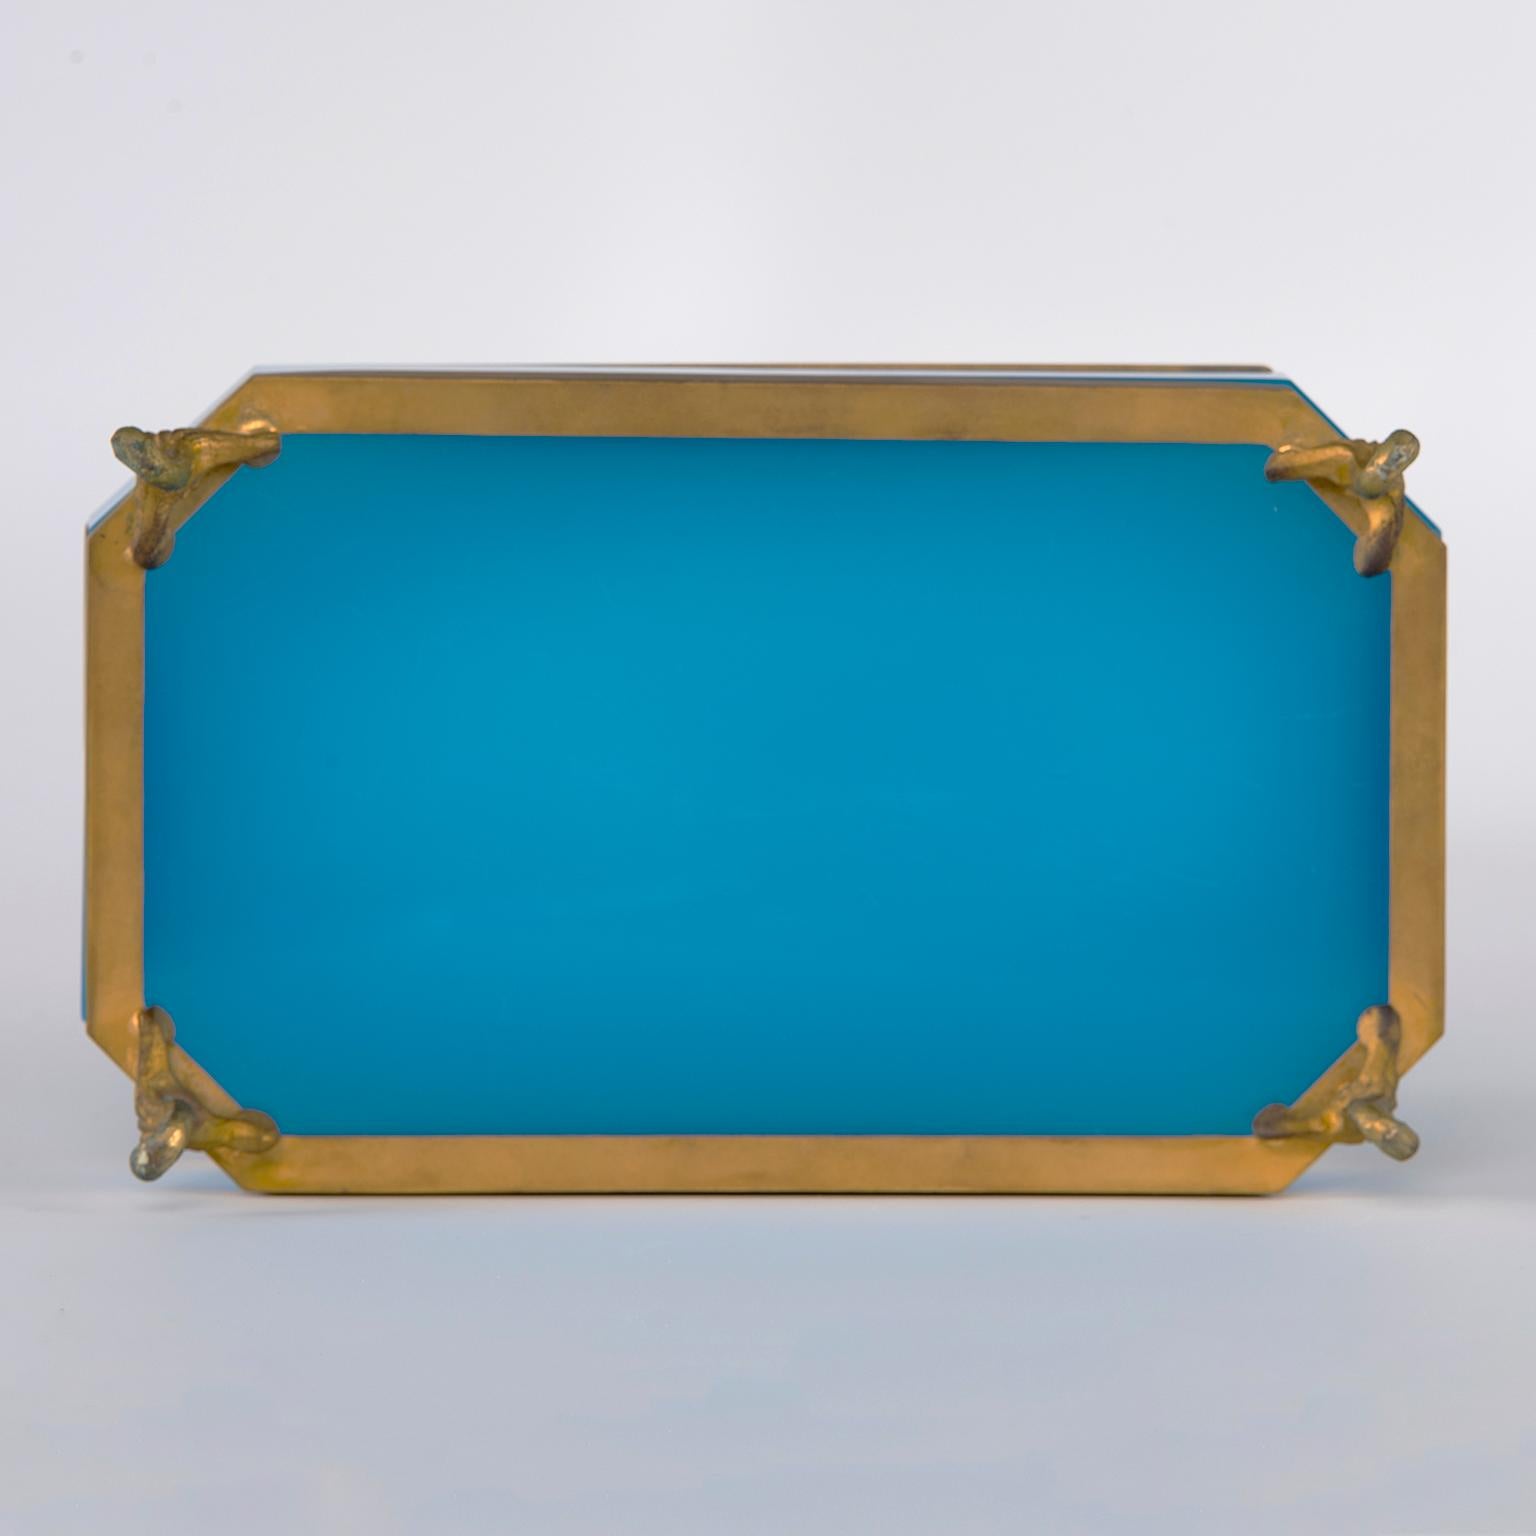 French opaline glass box is a stunning shade of marine blue with brass at the rim and base and brass cabriole feet, circa 1920s. Unknown maker.